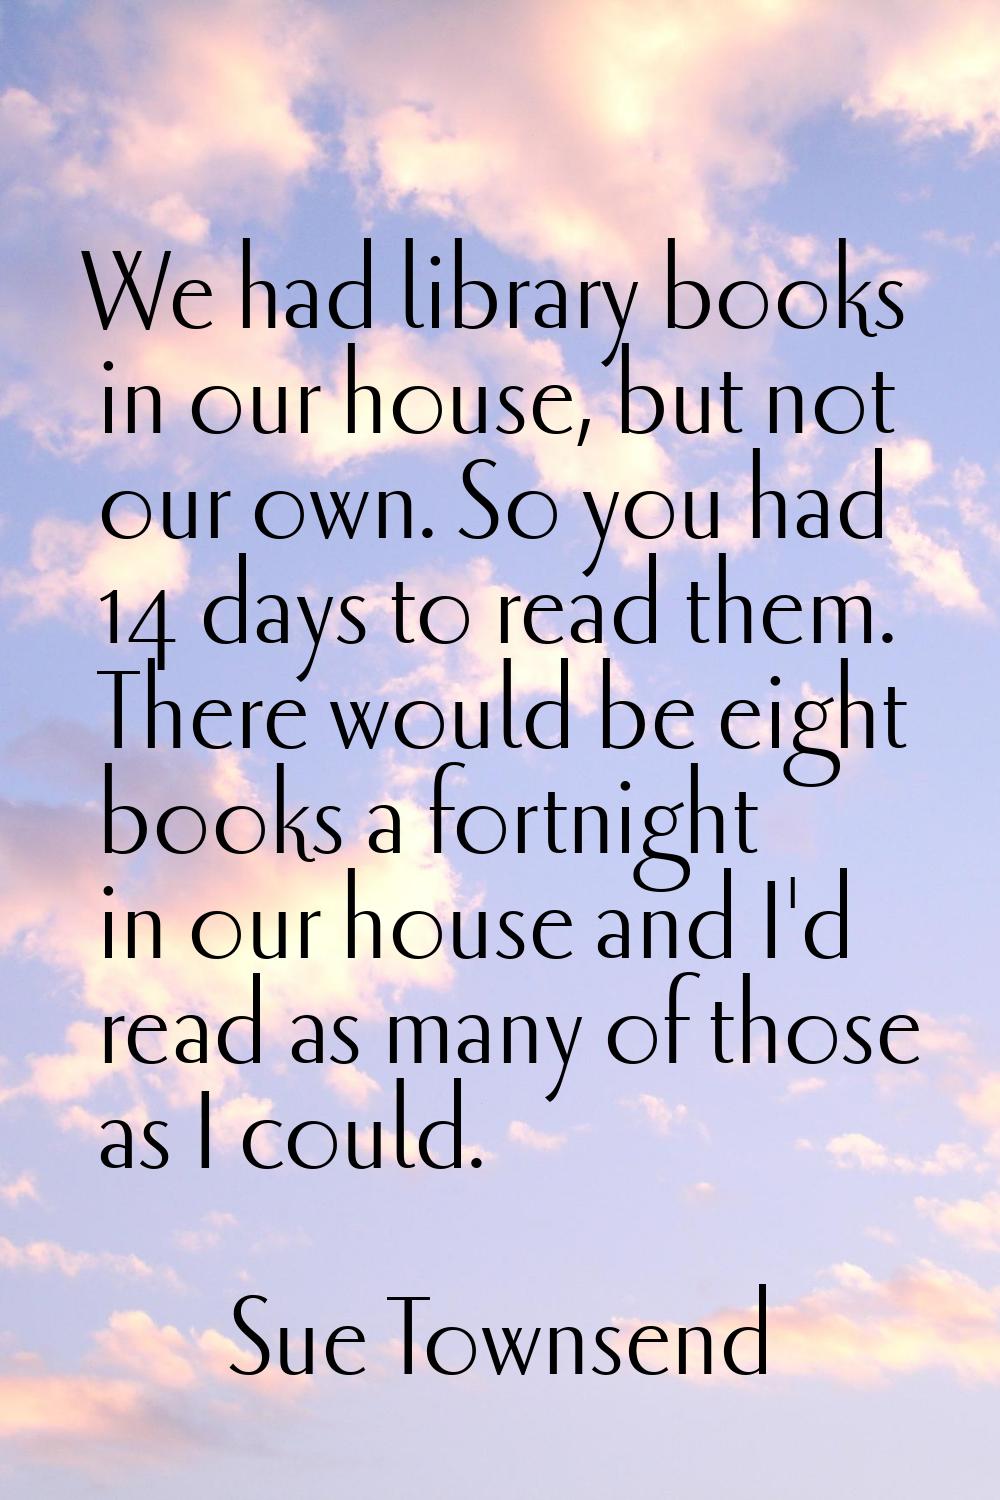 We had library books in our house, but not our own. So you had 14 days to read them. There would be